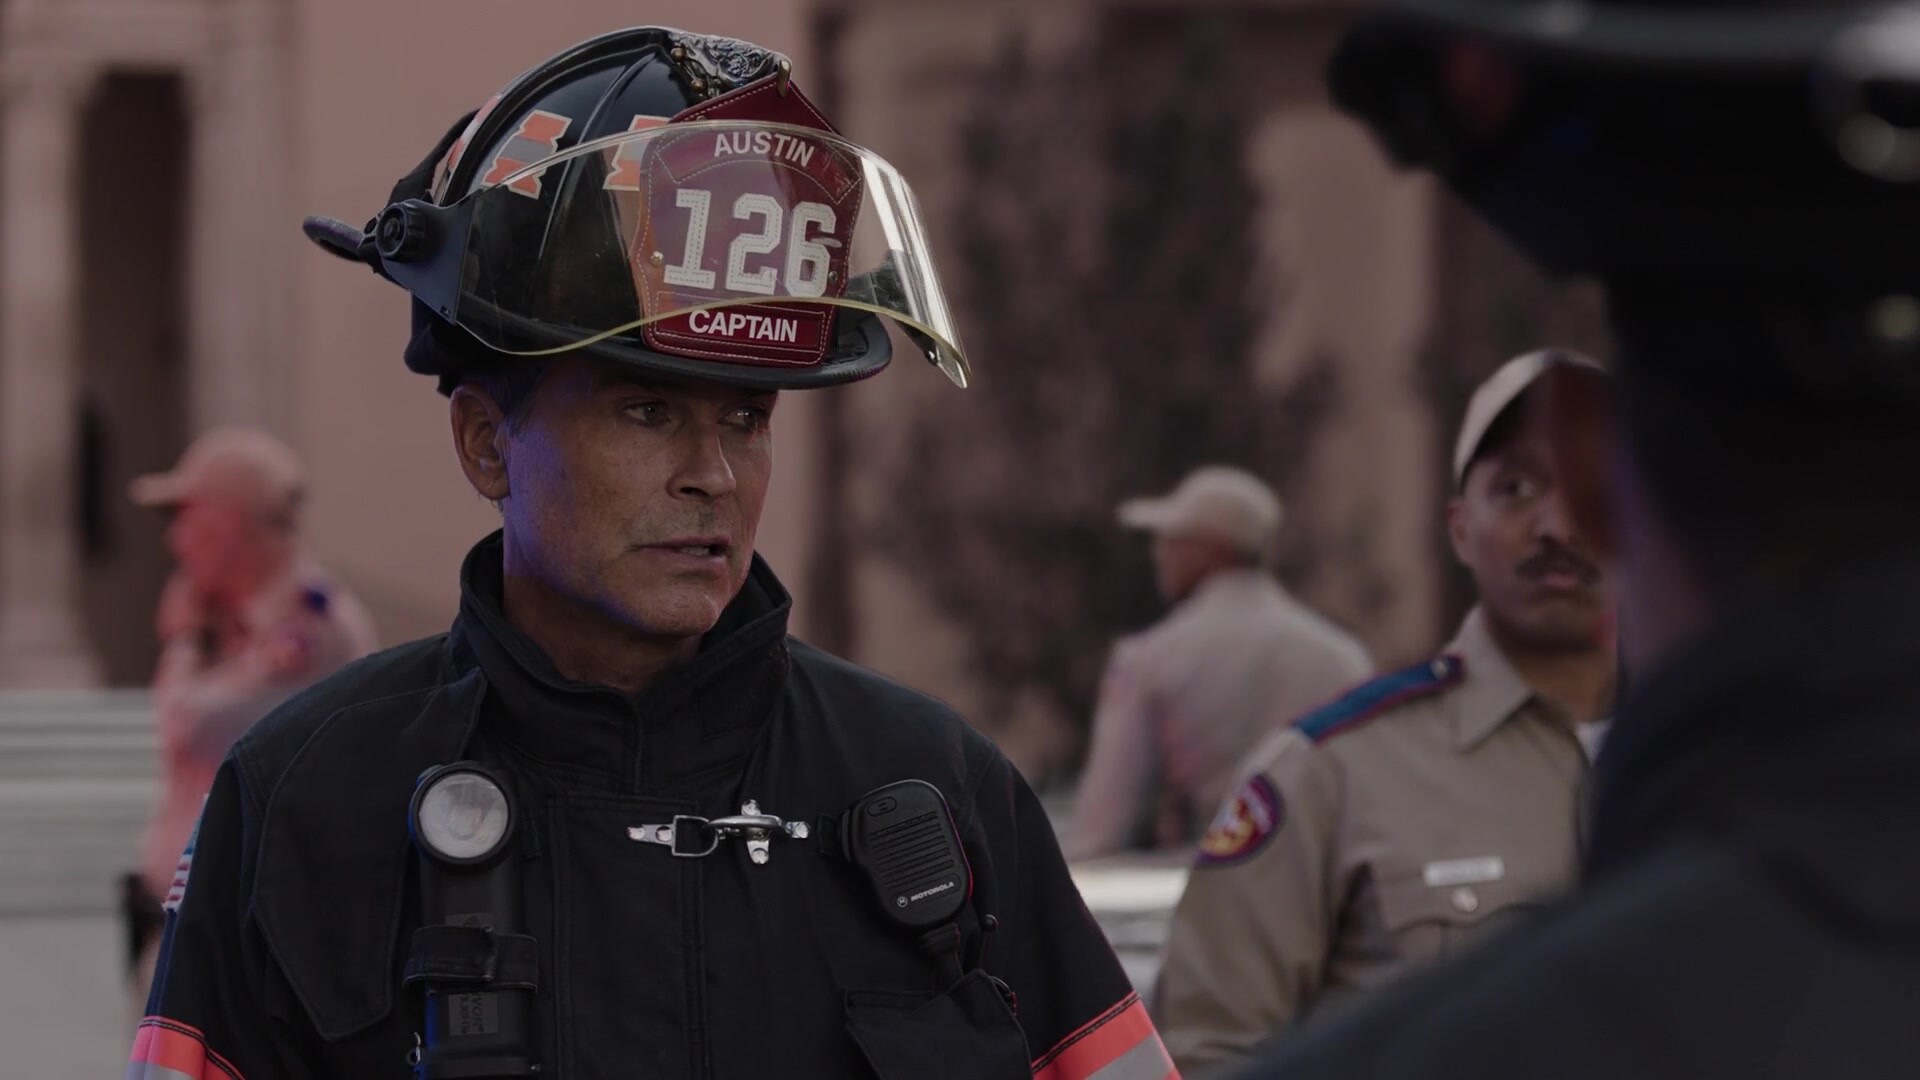 9-1-1: Lone Star (TV Series): Firefighter's Commander Relocated To Austin With His Son, Rebuilding Of Team 126. 1920x1080 Full HD Wallpaper.